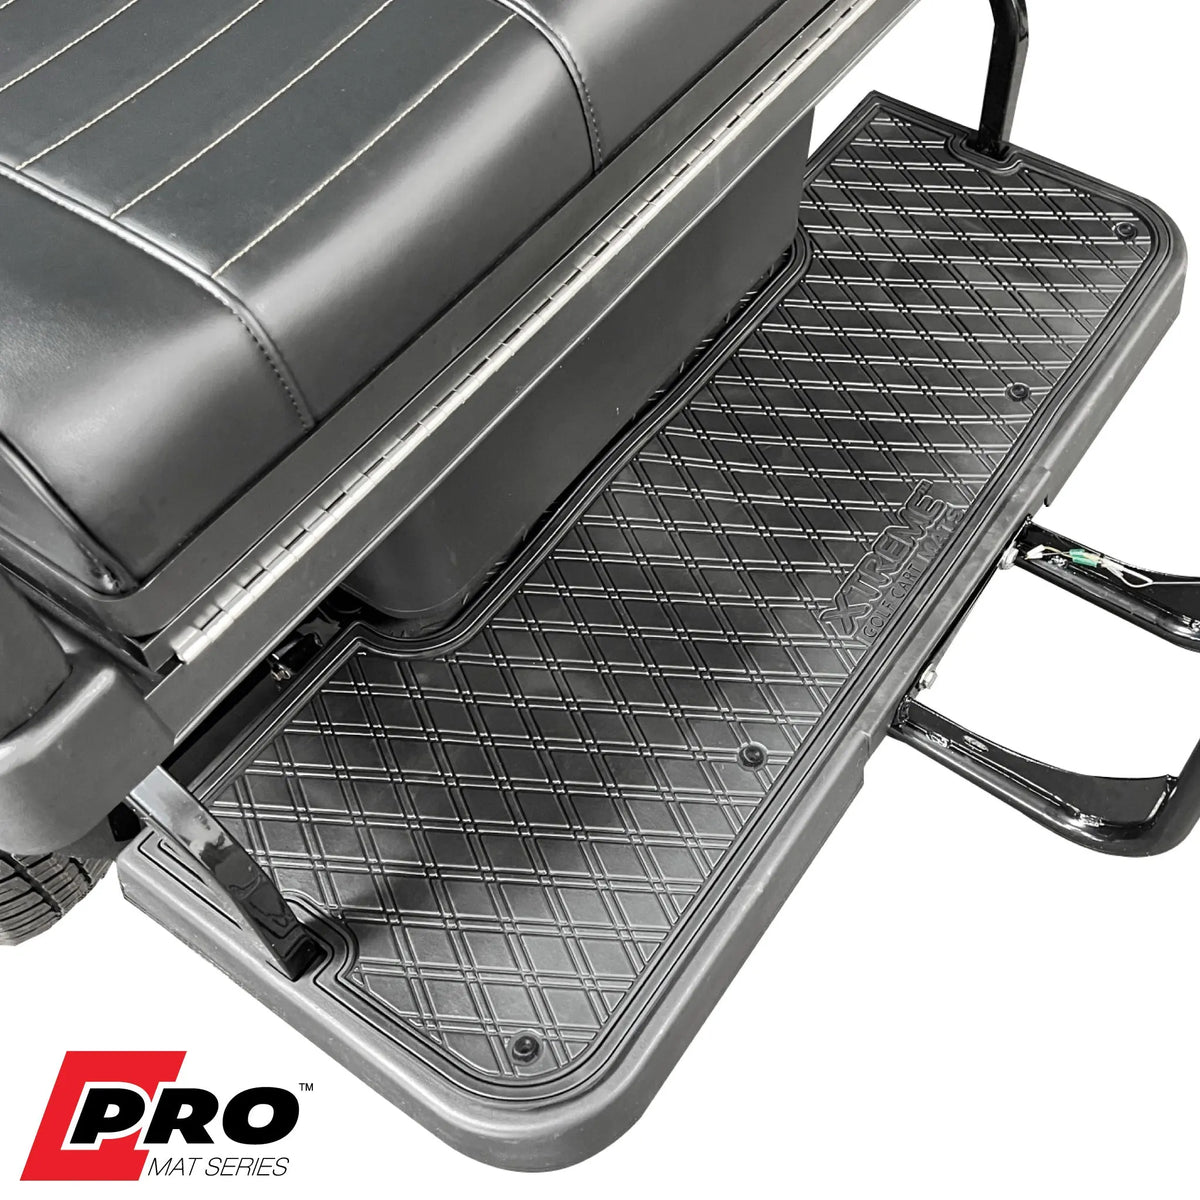 The Xtreme Mats PRO Series Rear Facing Foot Rest for several golf cart models.